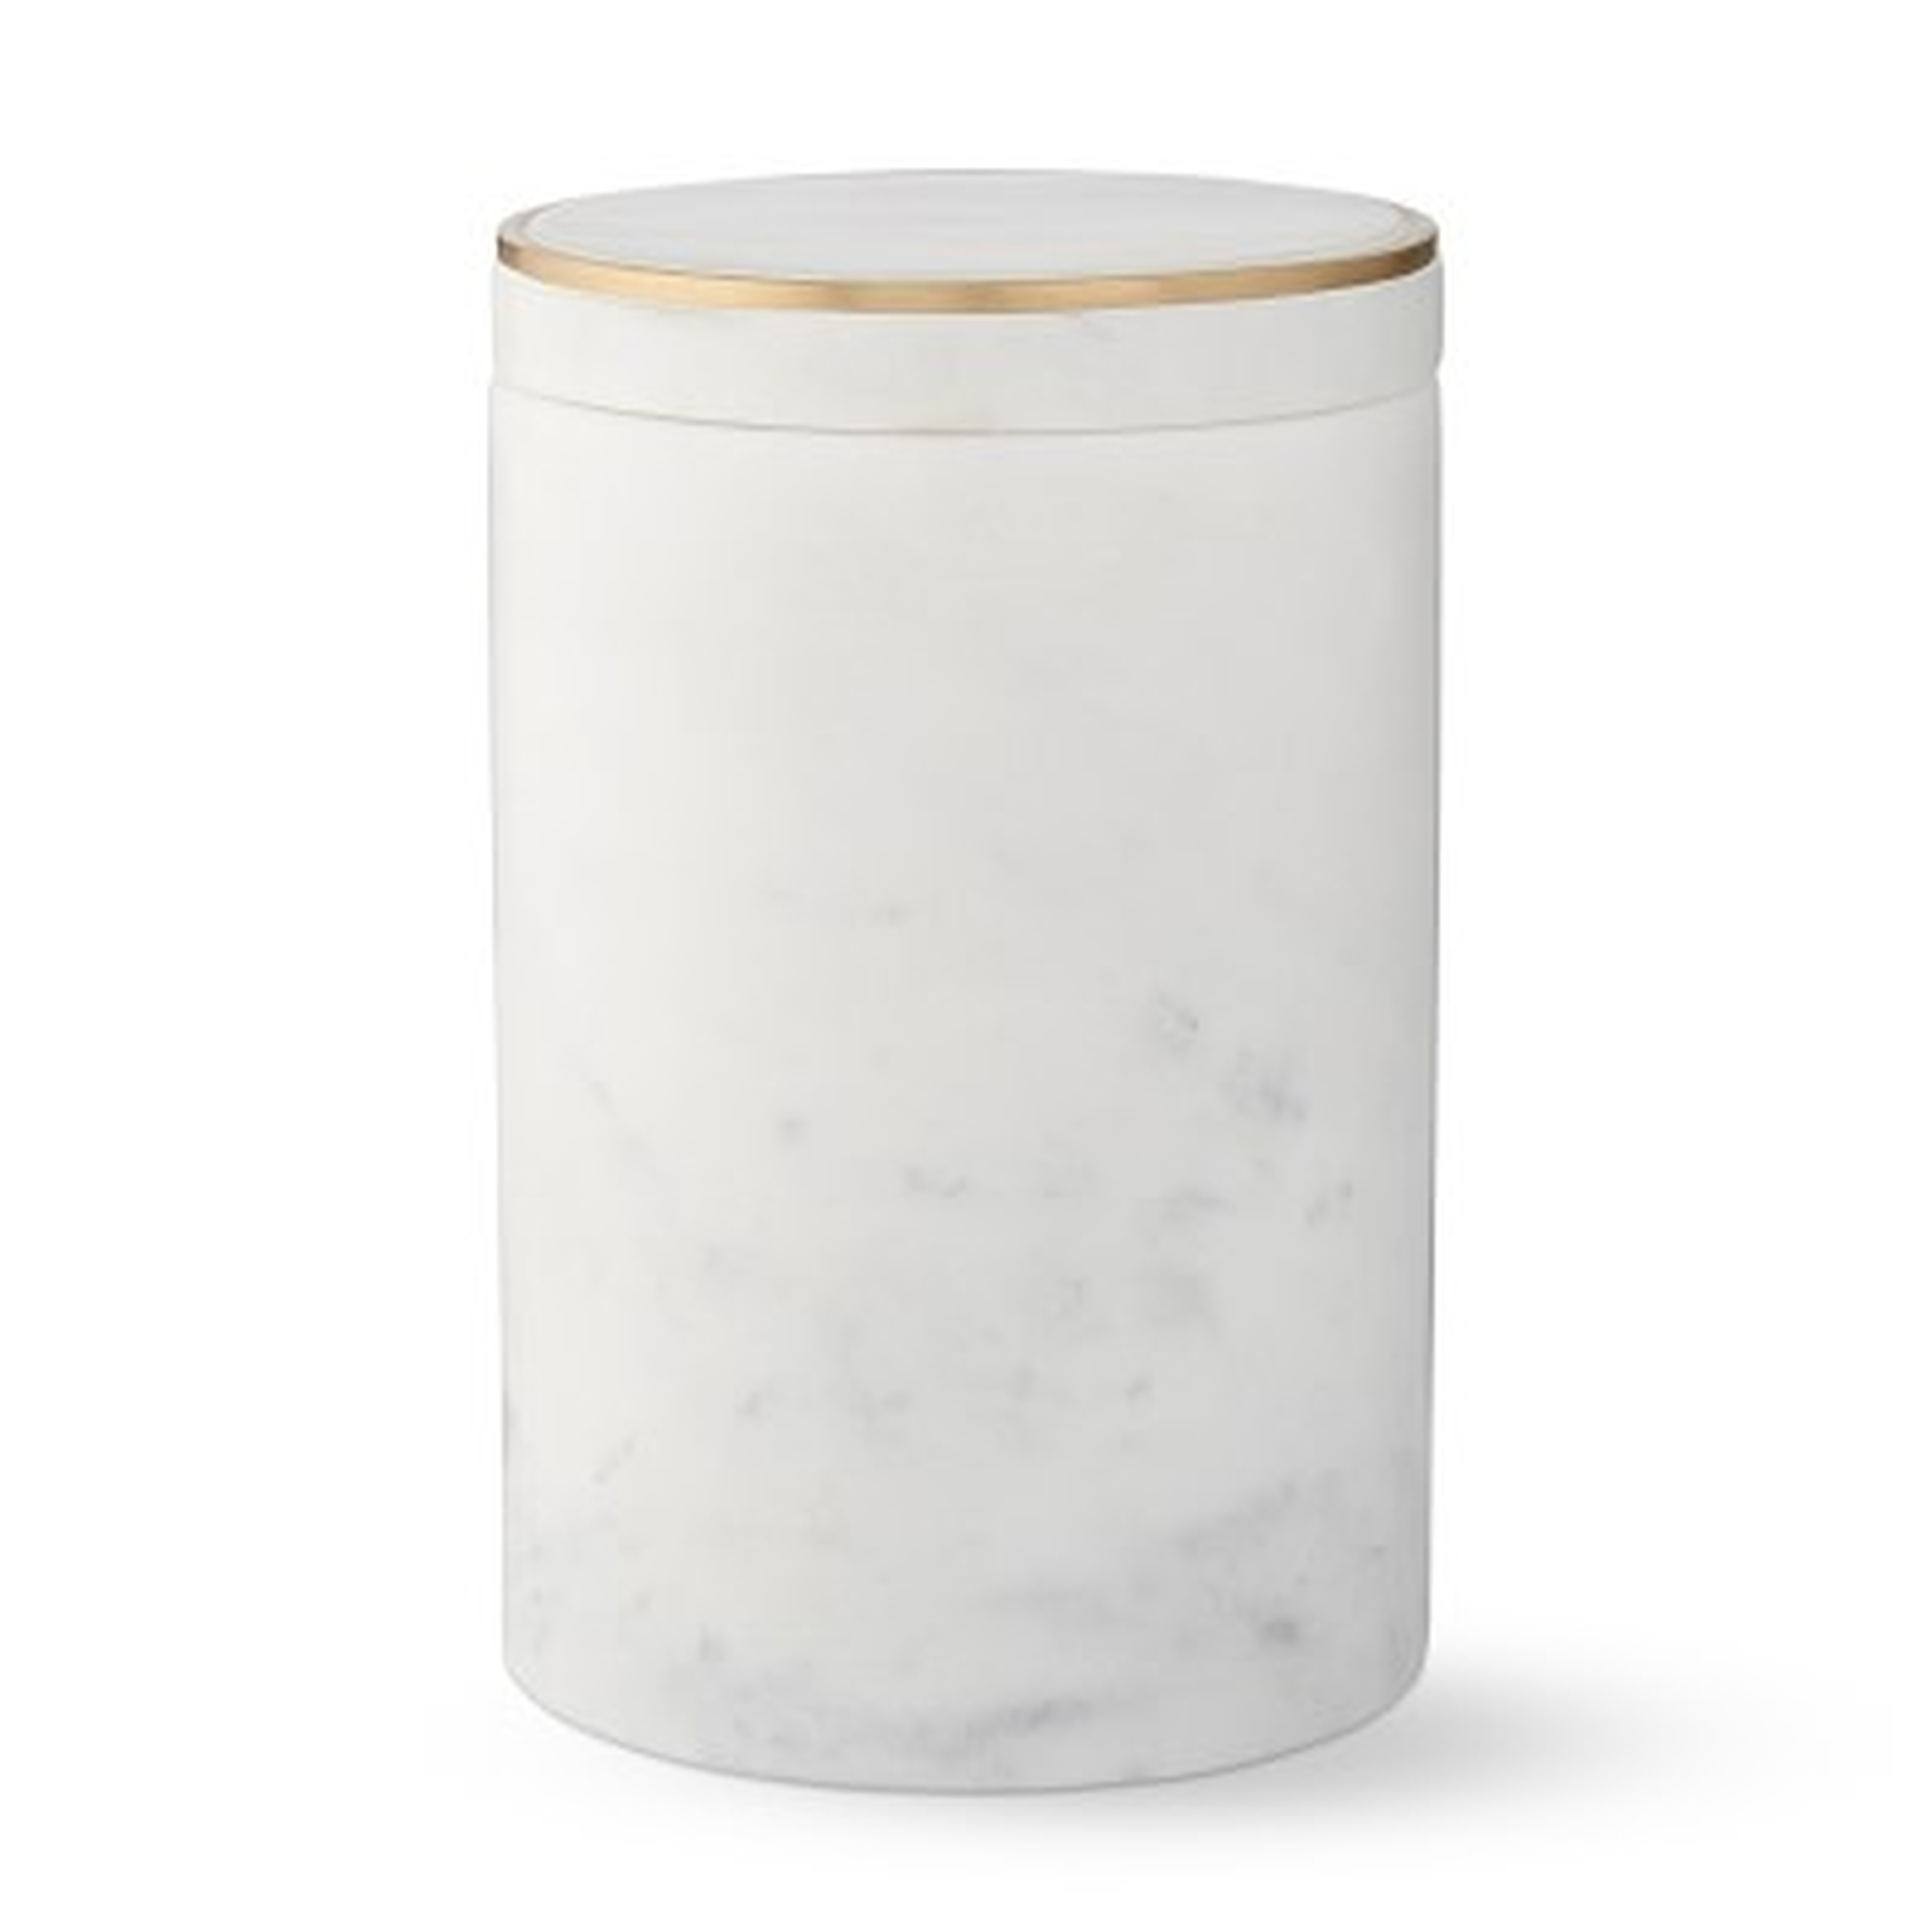 Marble and Brass Bath Canister, Large - Williams Sonoma